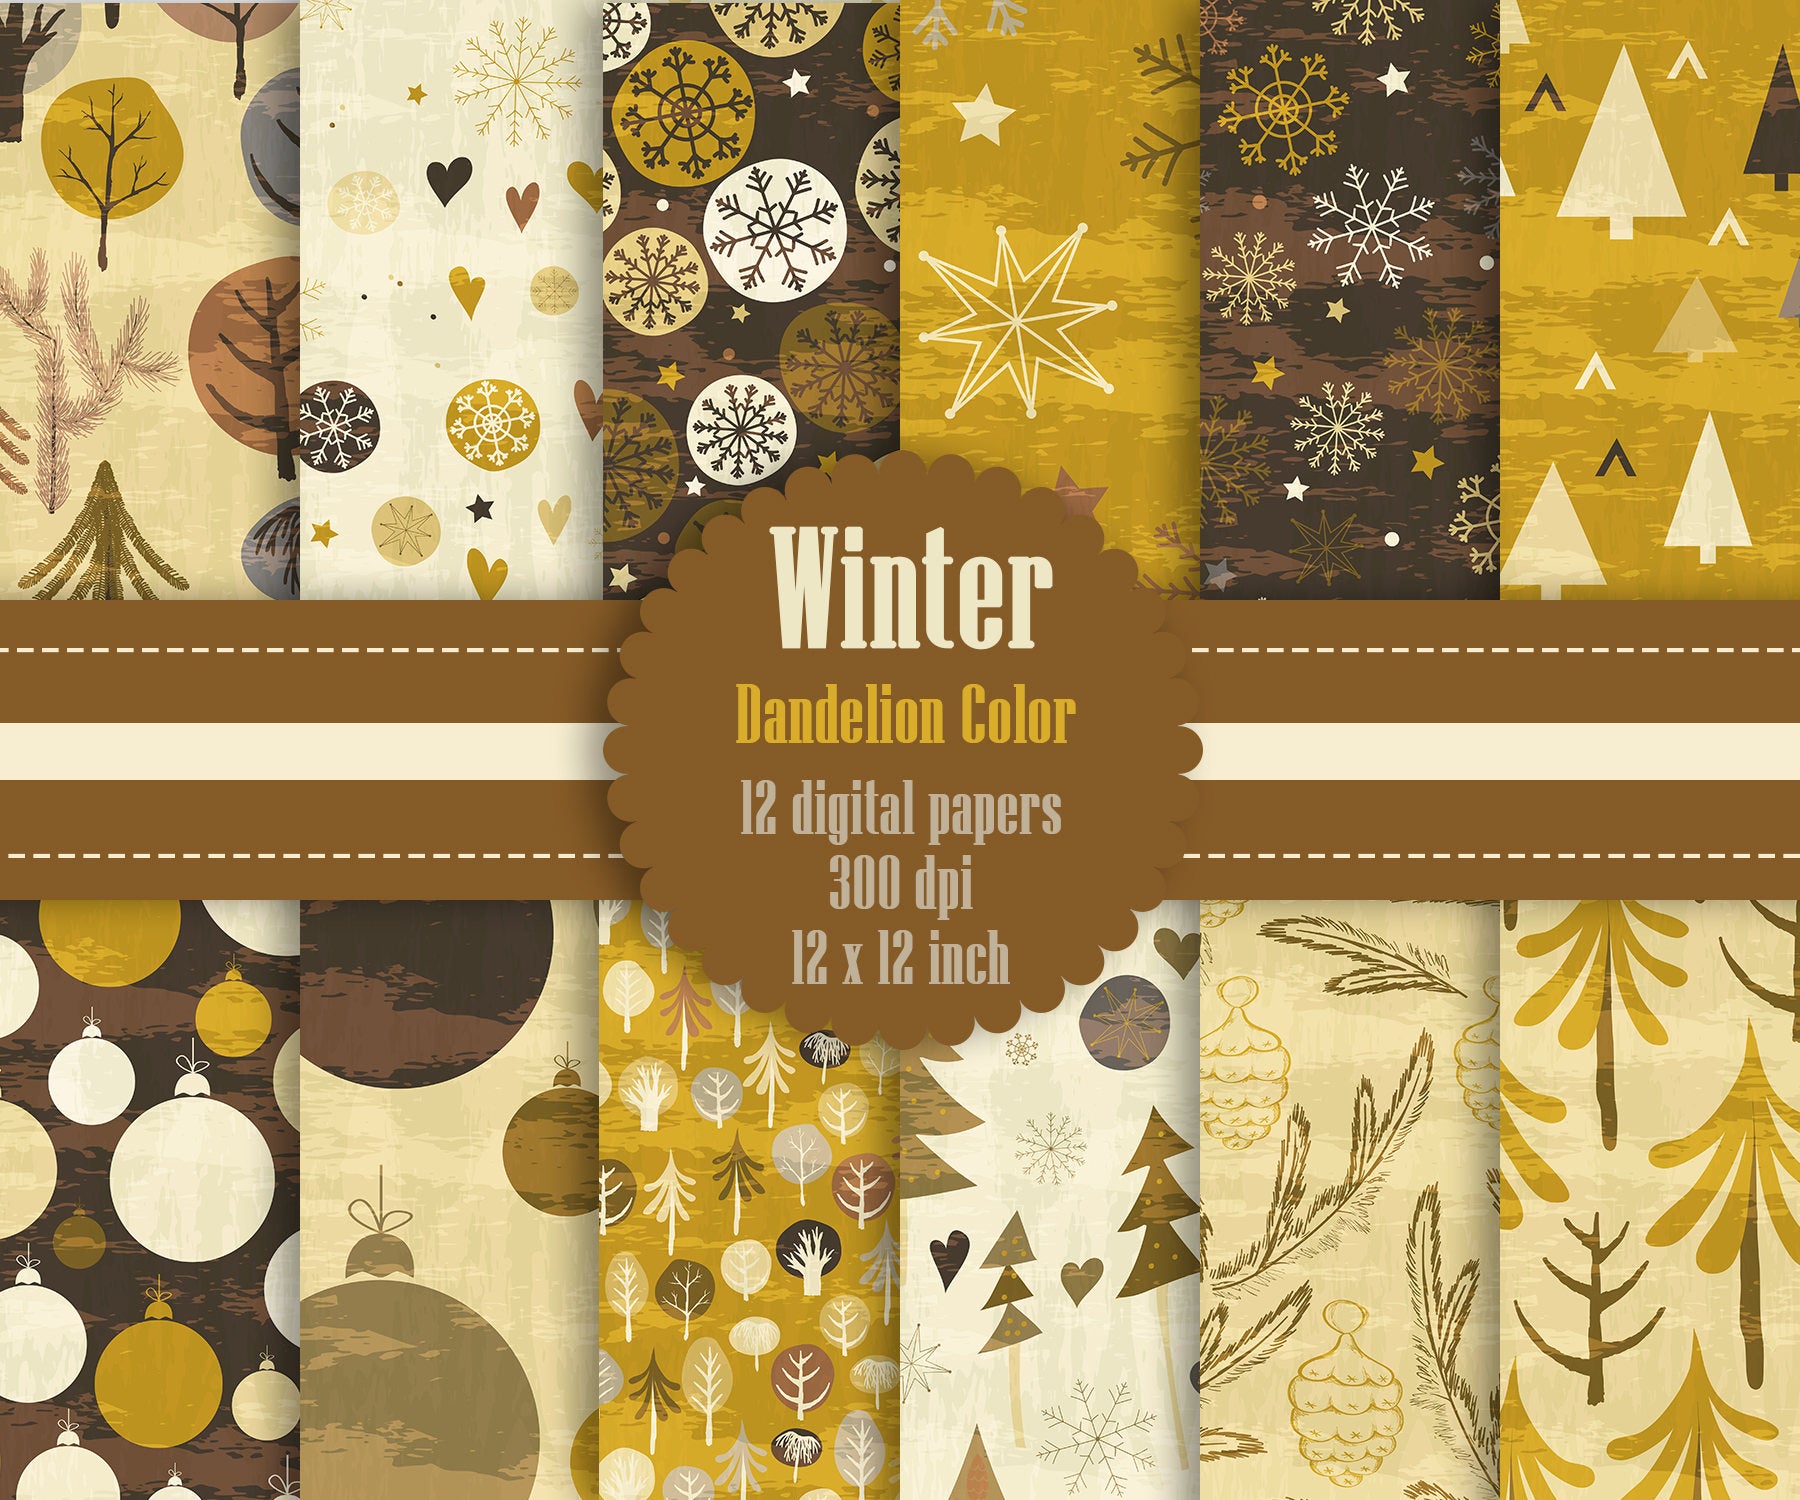 12 Winter Pattern Digital Papers in Dandelion Theme Color in 12 inch, Instant Download, High Resolution 300 Dpi, Commercial Use